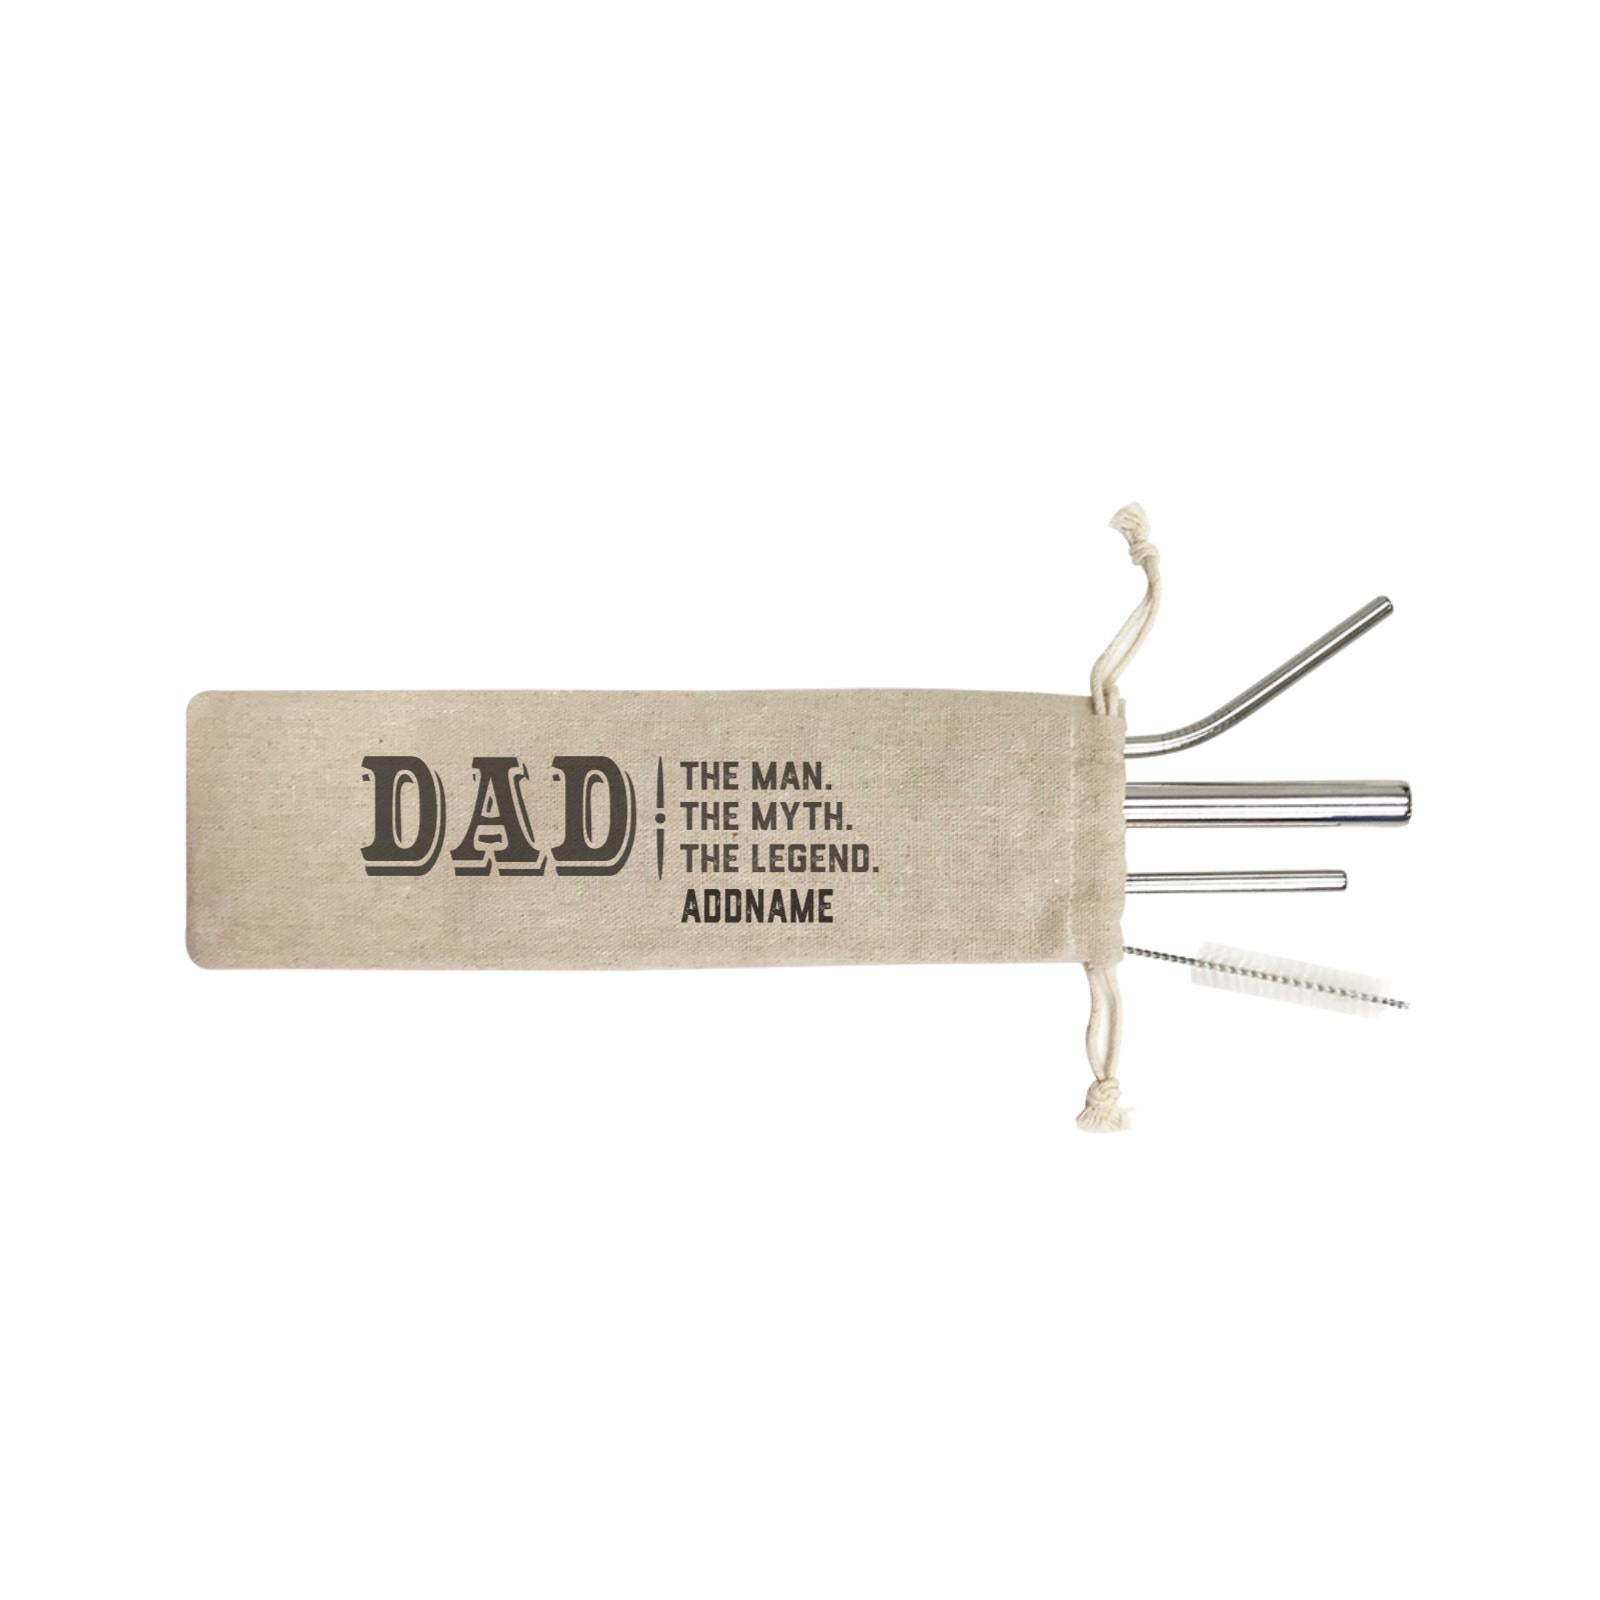 Dad The Man The Myth The Legend Addname SB 4-In-1 Stainless Steel Straw Set in Satchel